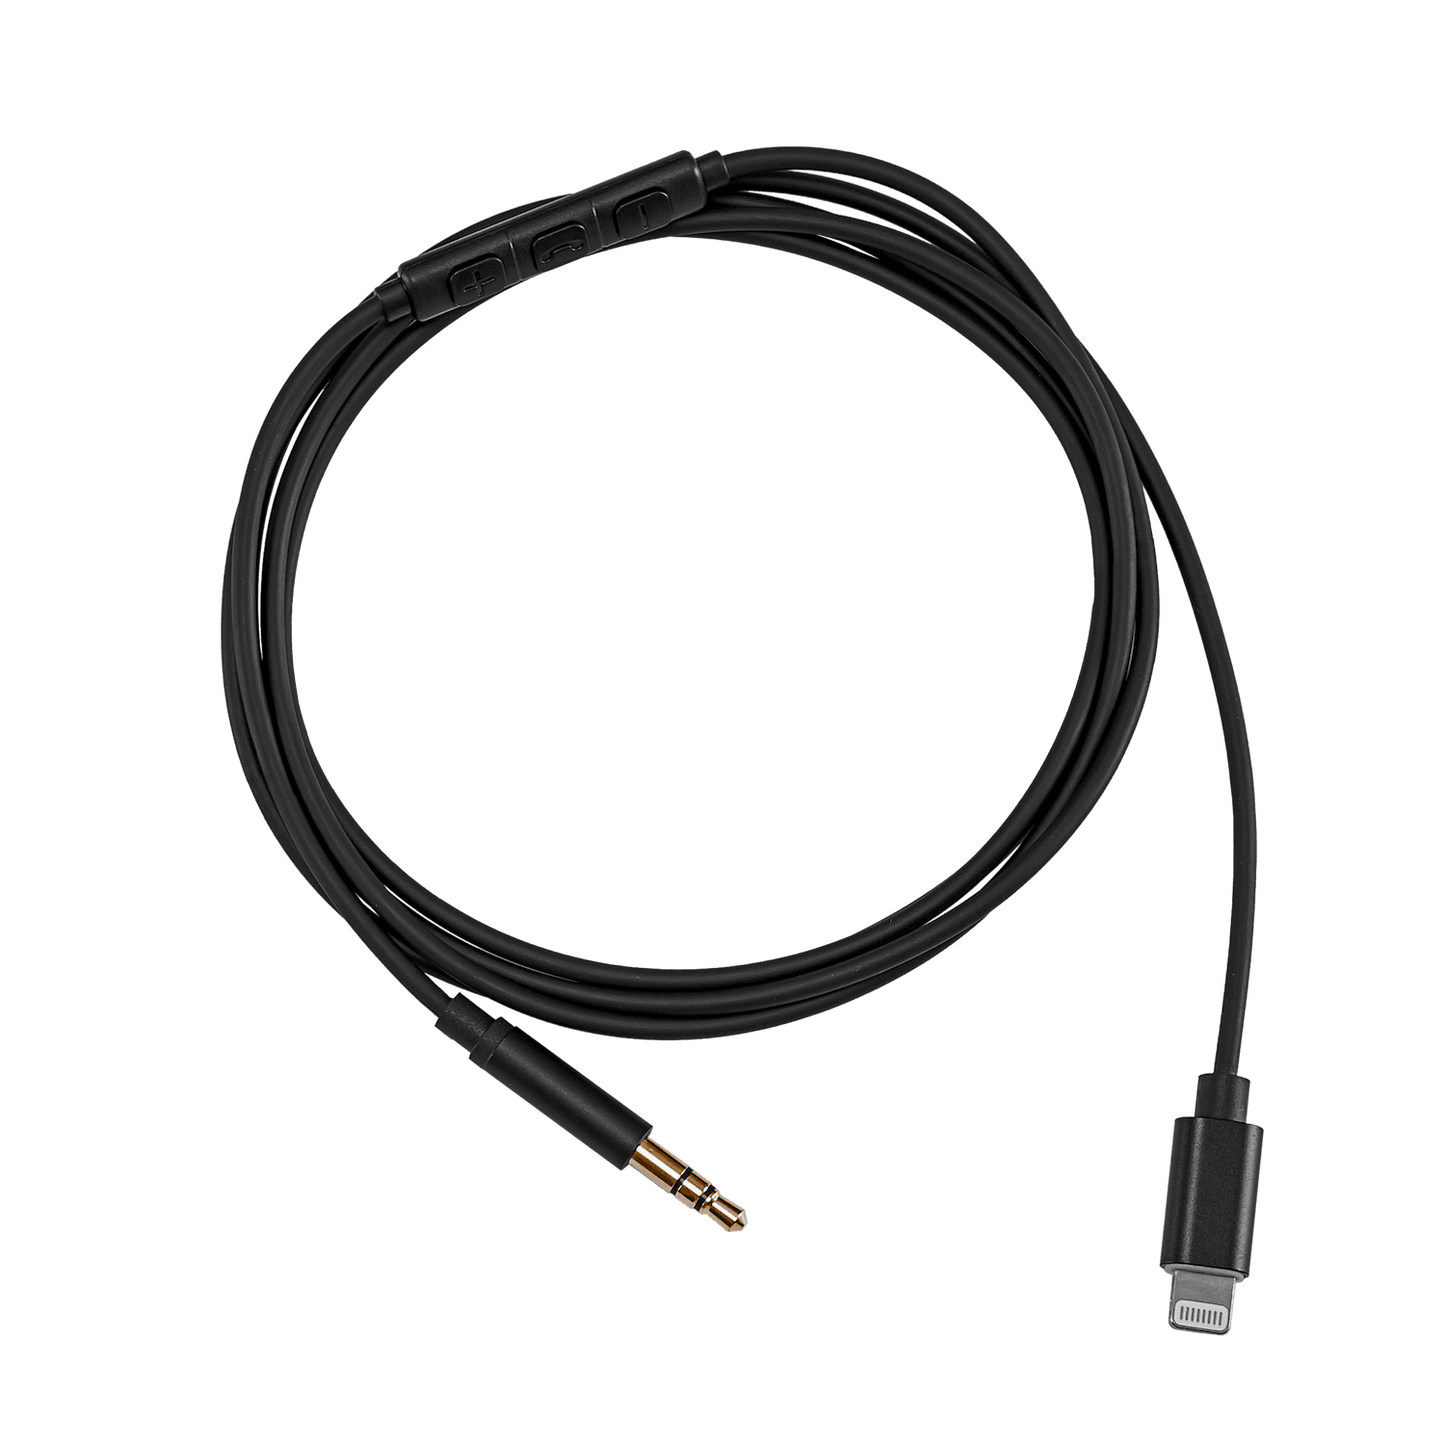 MIIEGO Audio cable with Lightning